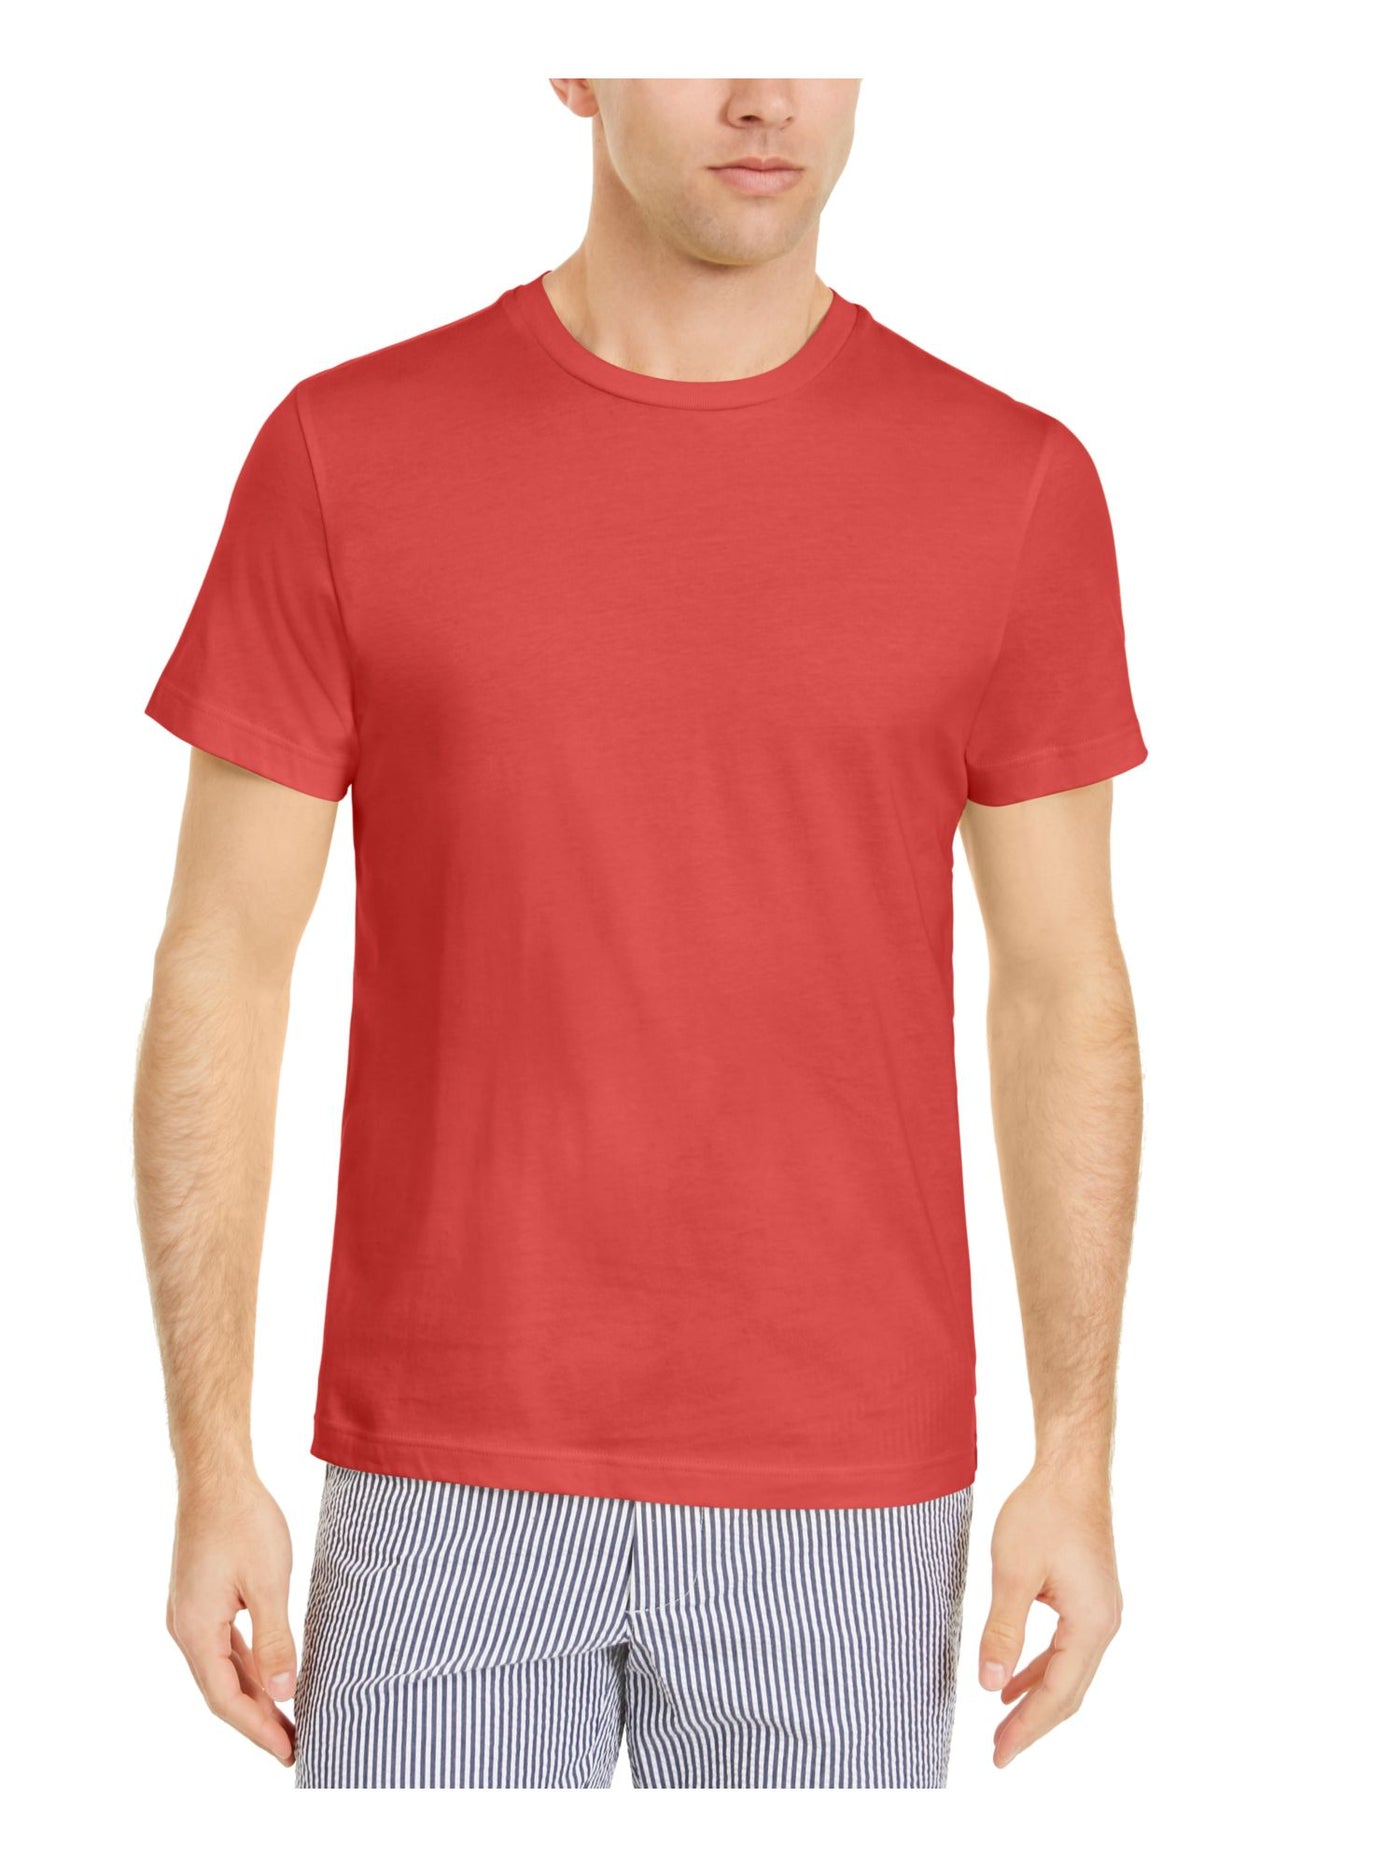 CLUBROOM Mens Red Classic Fit T-Shirt M